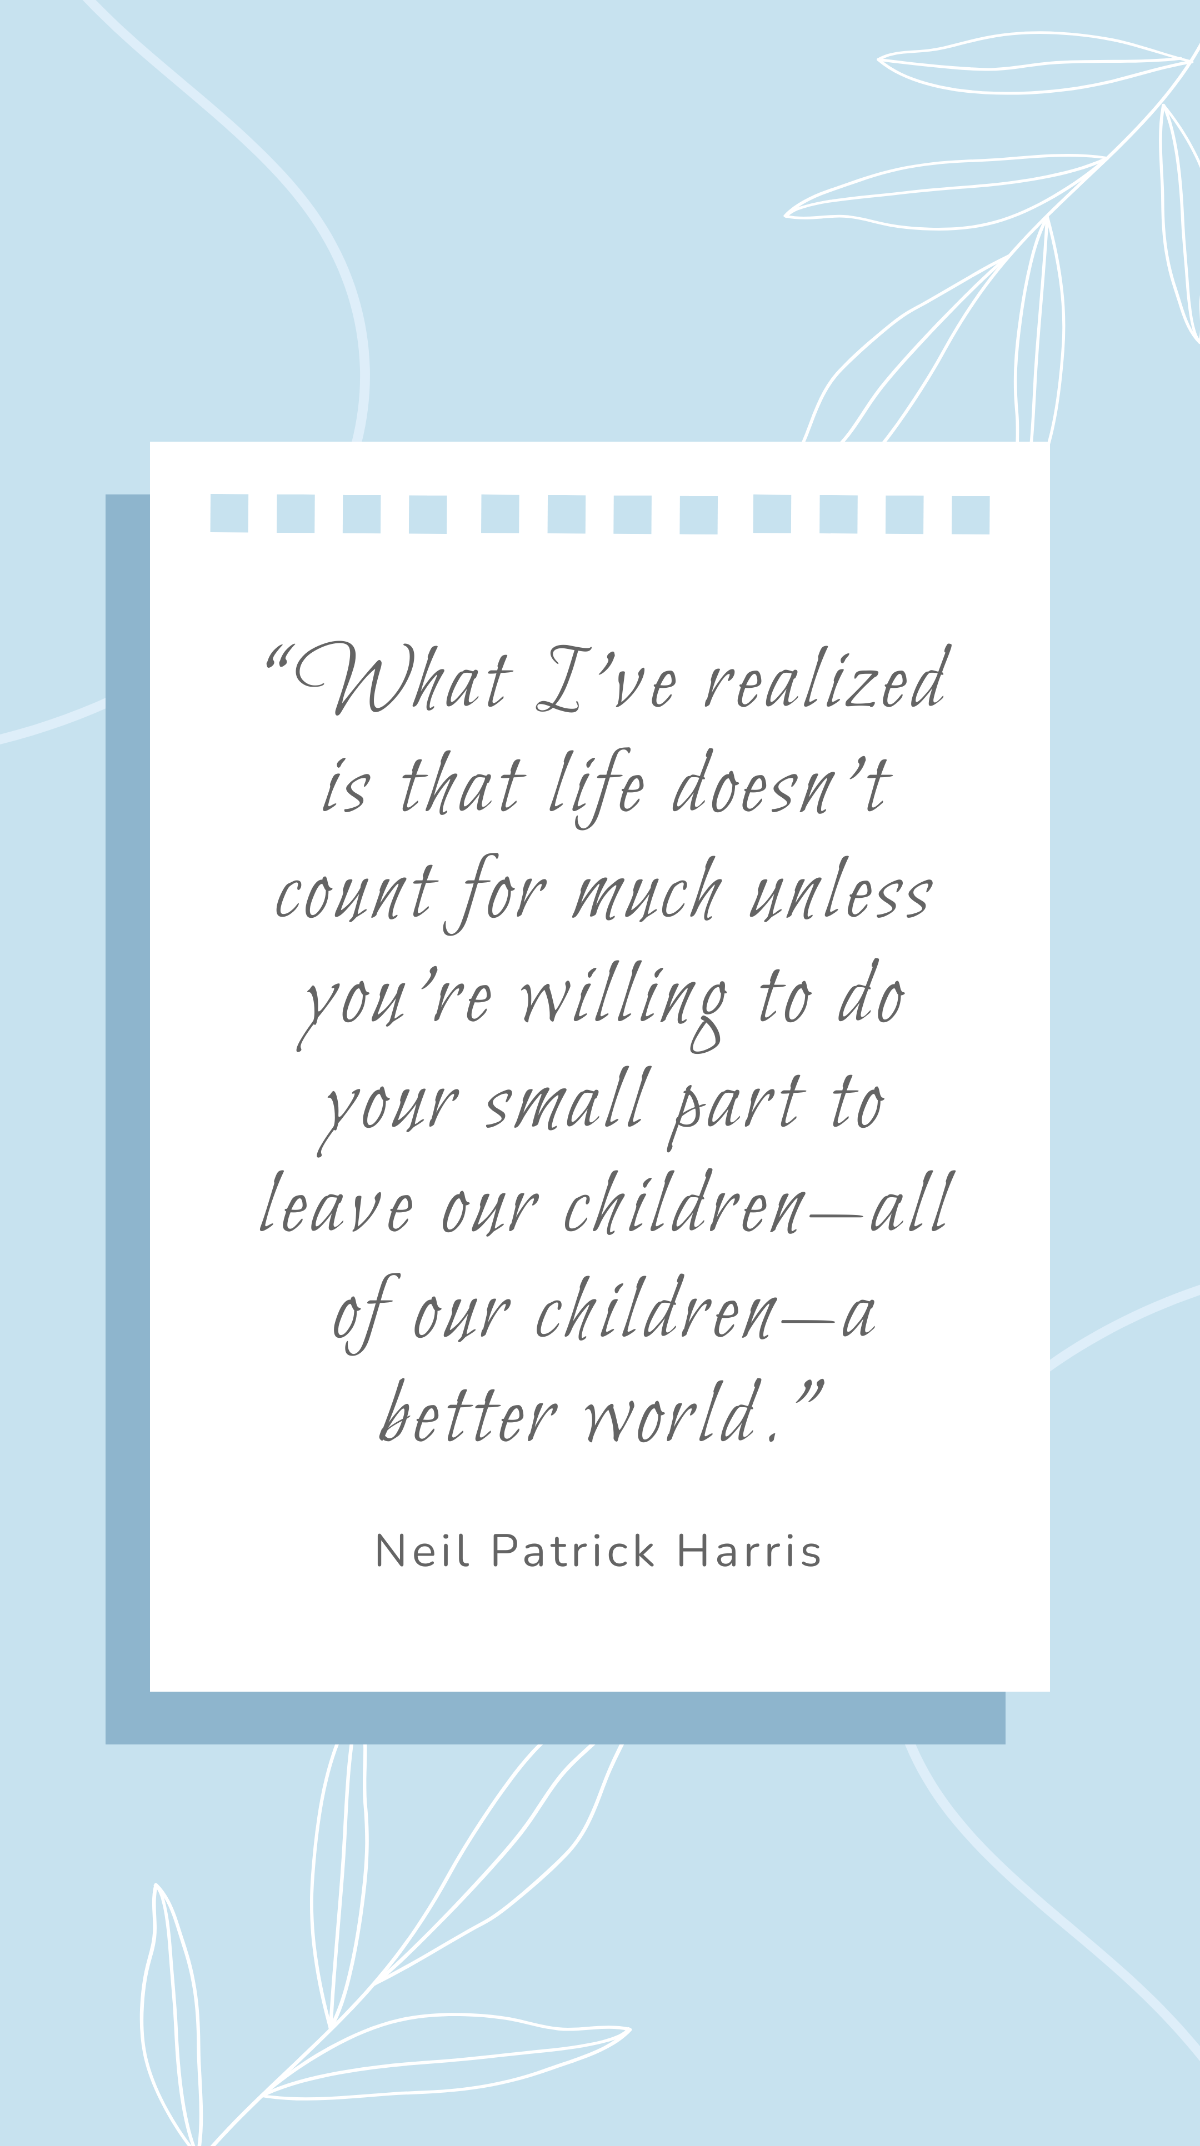 Neil Patrick Harris - “What I’ve realized is that life doesn’t count for much unless you’re willing to do your small part to leave our children—all of our children—a better world.” Template